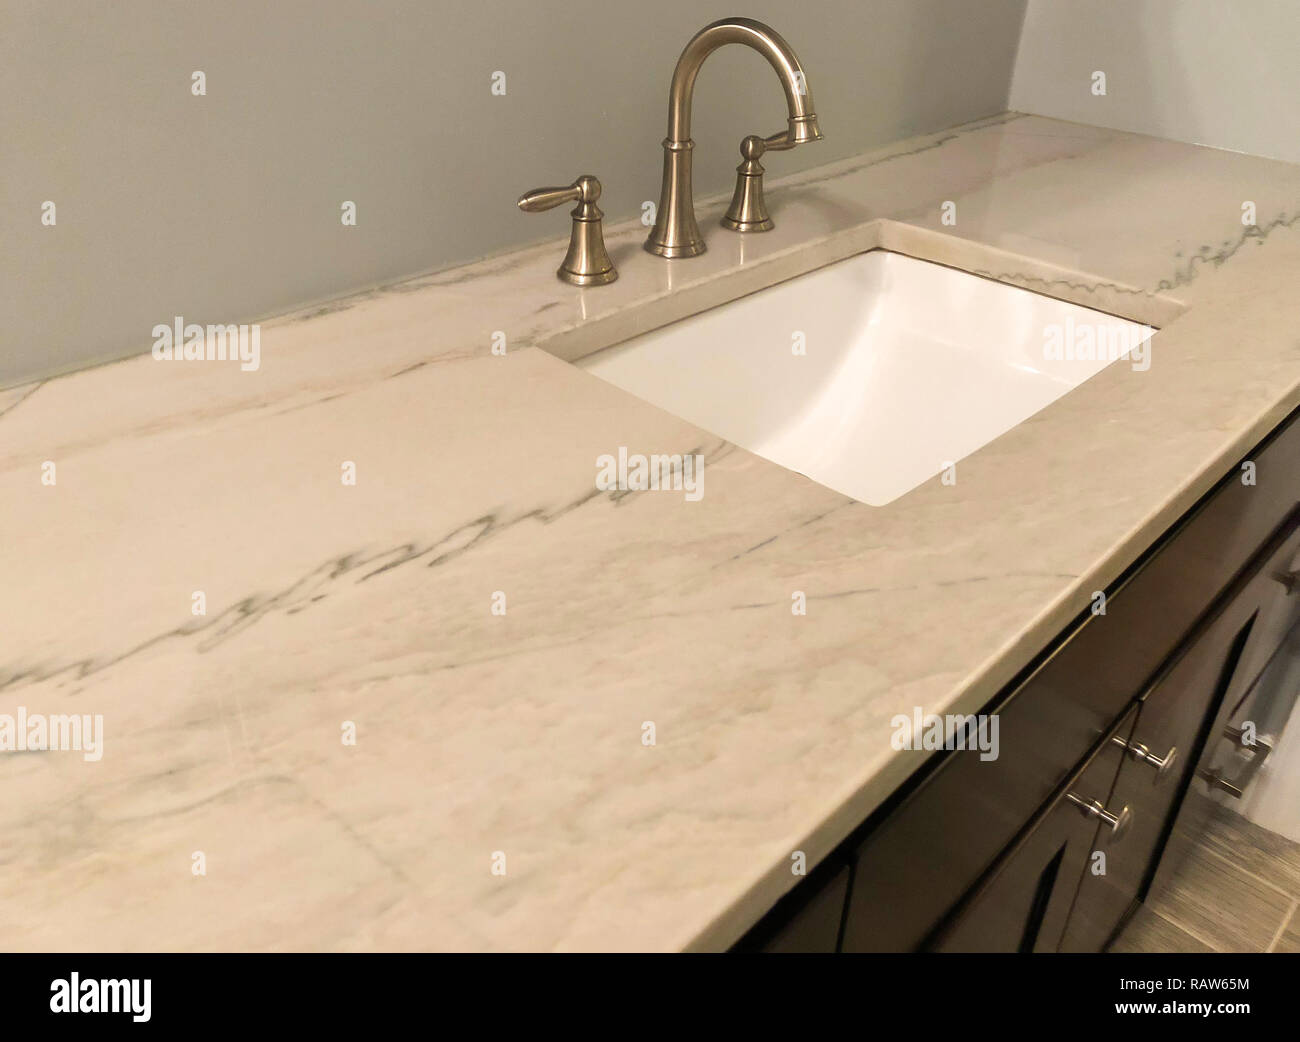 Sink and faucet in modern bathroom Stock Photo